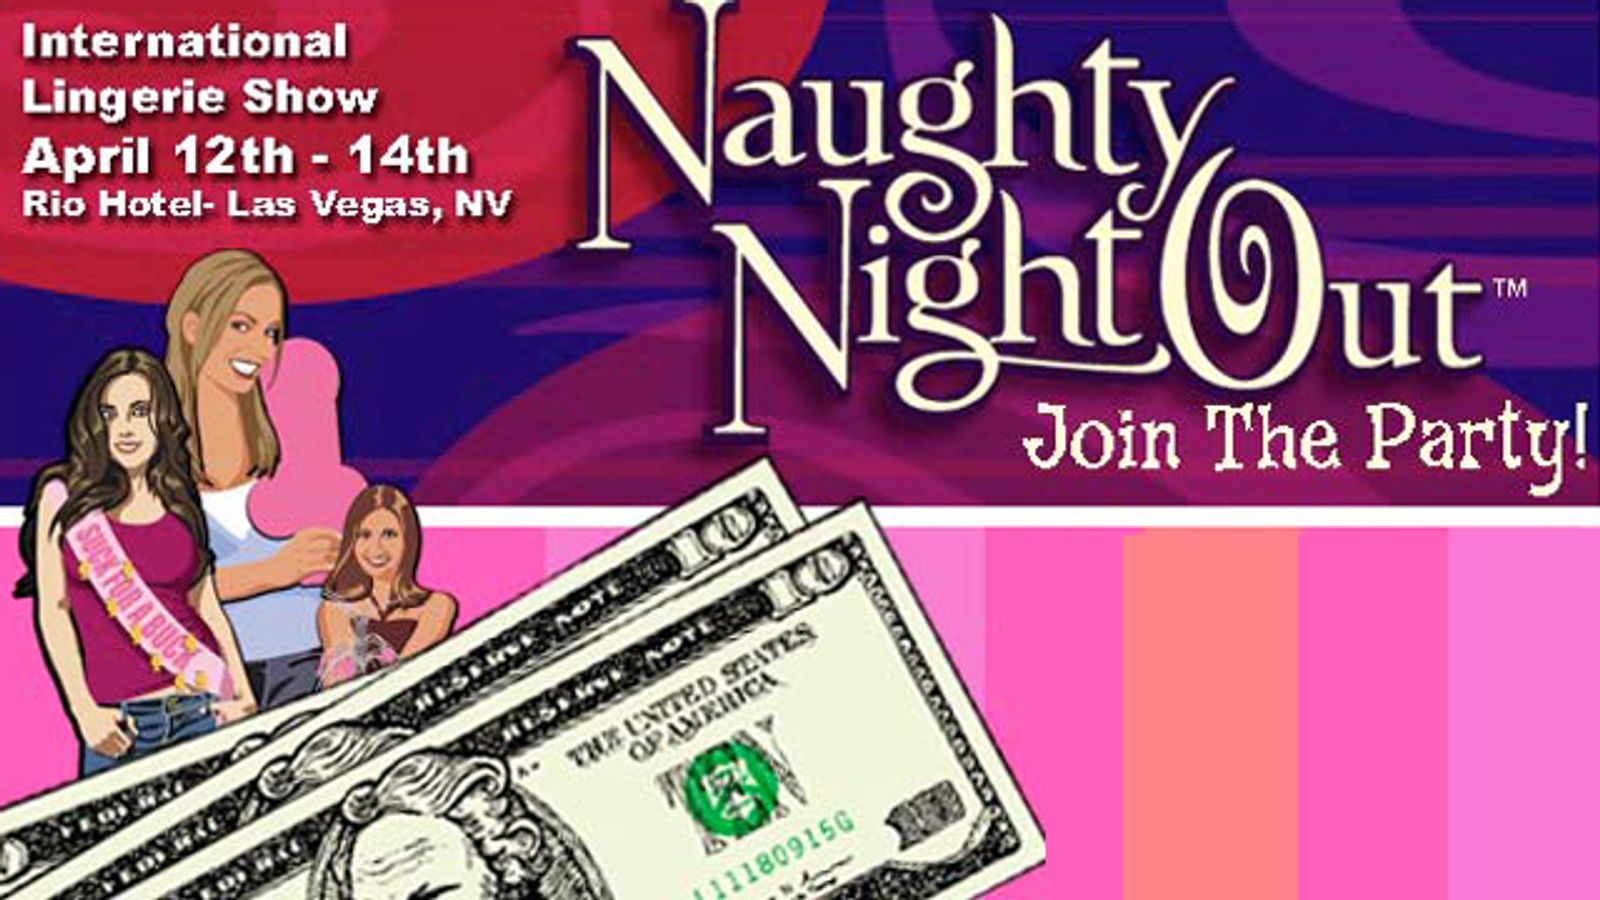 Naughty Night Out Gives Cash on the Spot